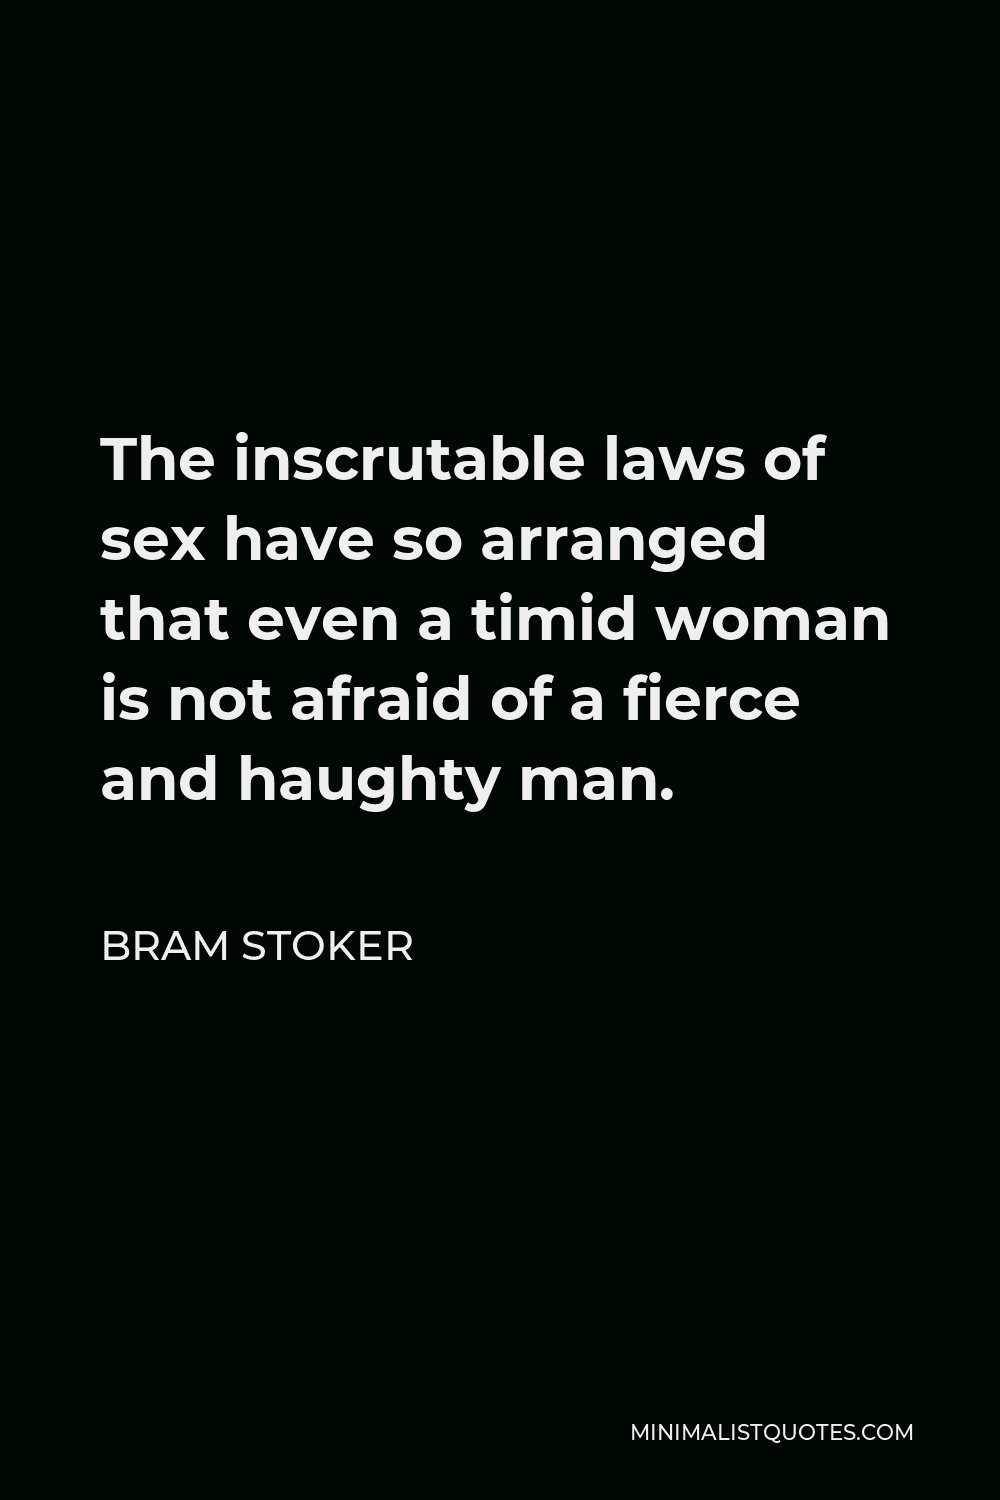 Bram Stoker Quote The Inscrutable Laws Of Sex Have So Arranged That Even A Timid Woman Is Not